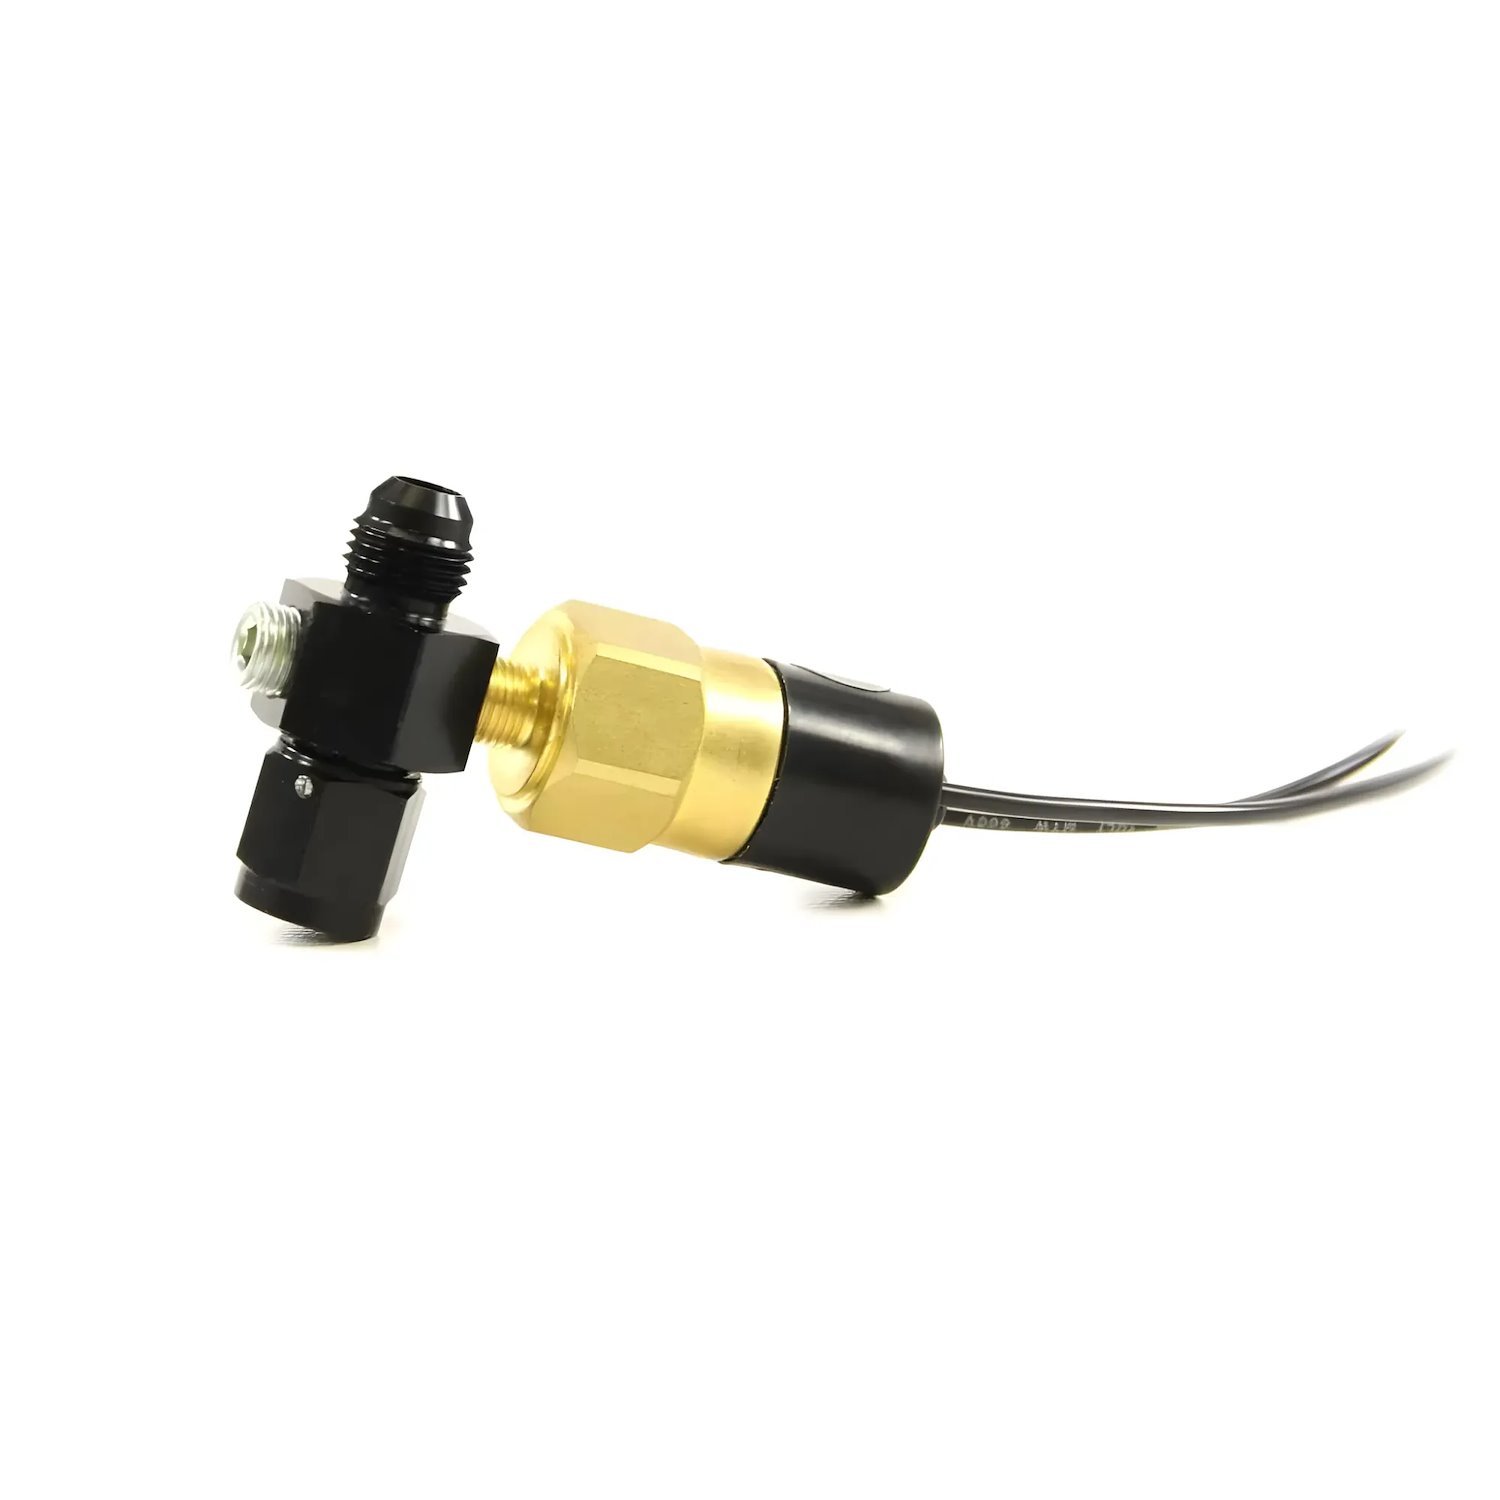 00-60000-6 Fuel Pressure Safety Switch, 6AN Manifold/Low Pressure/Preset 5 psi/Adjustable 1.5-20 psi.